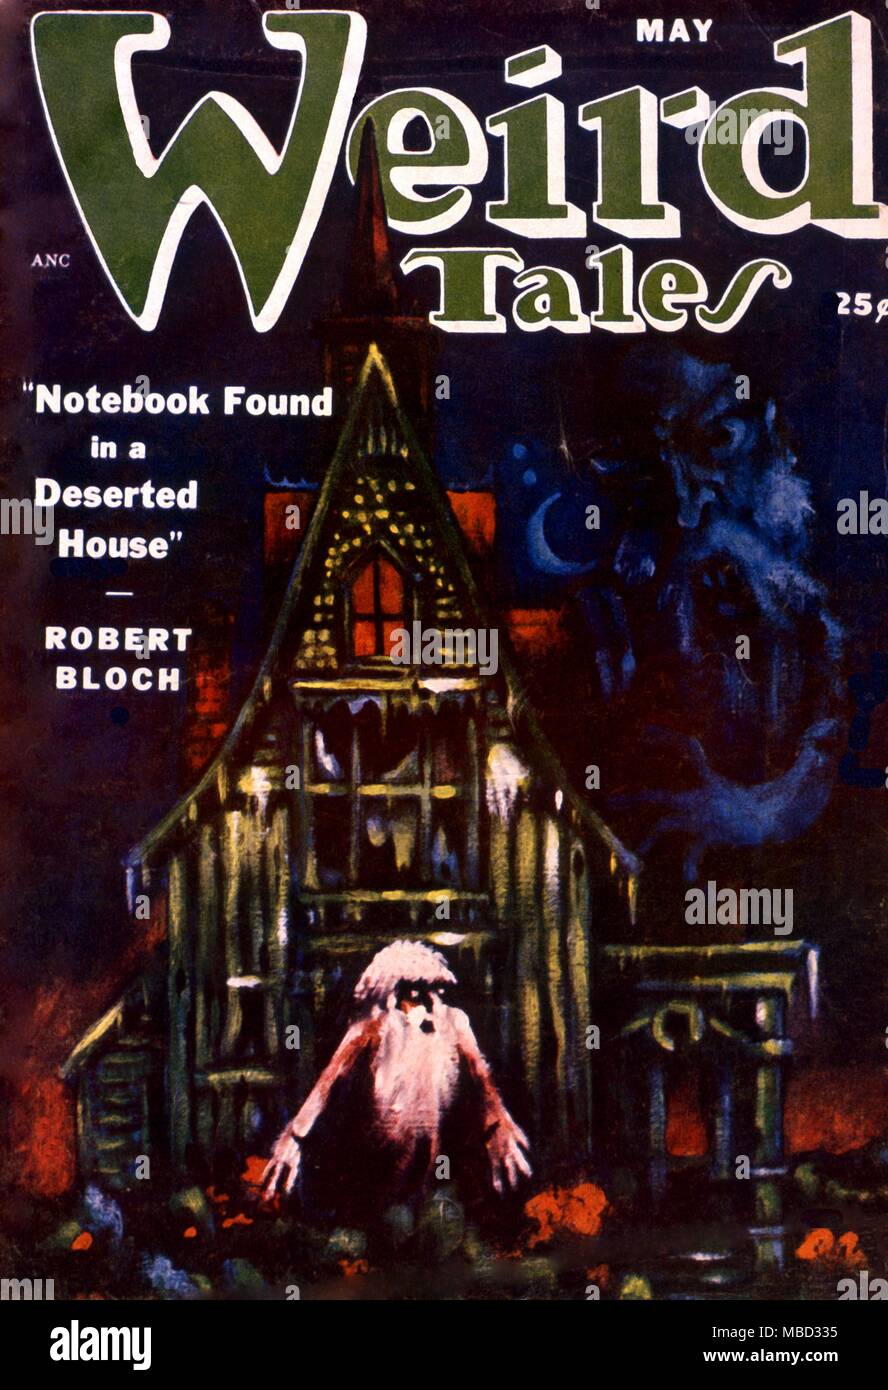 Science Fiction and Horror Magazines. 'Weird Tales' cover. May 1951. Artwork by Coye Stock Photo